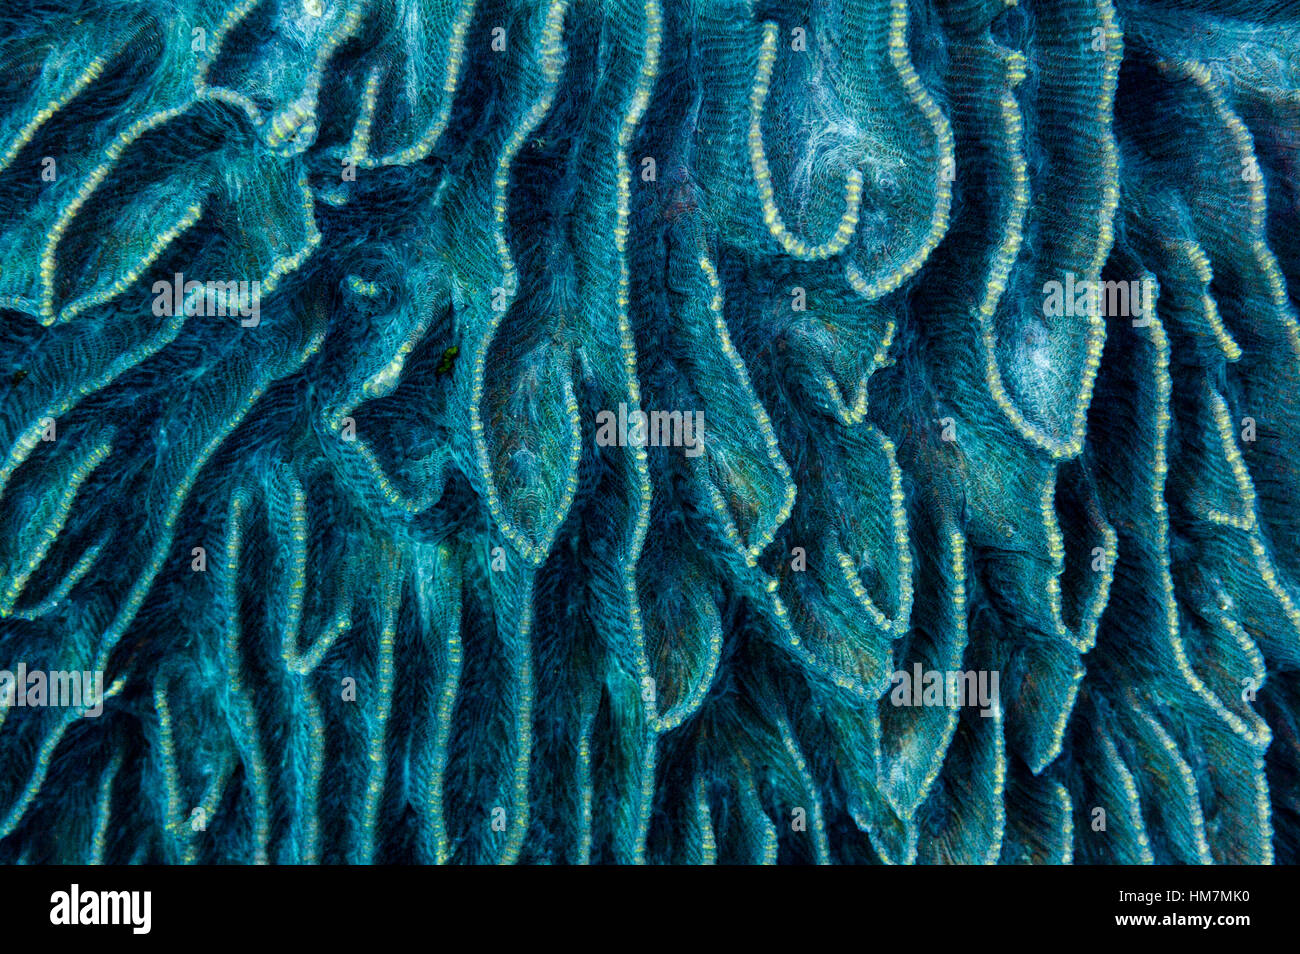 The blue velvet labia-like  folds of a hard coral on a tropical reef. Stock Photo